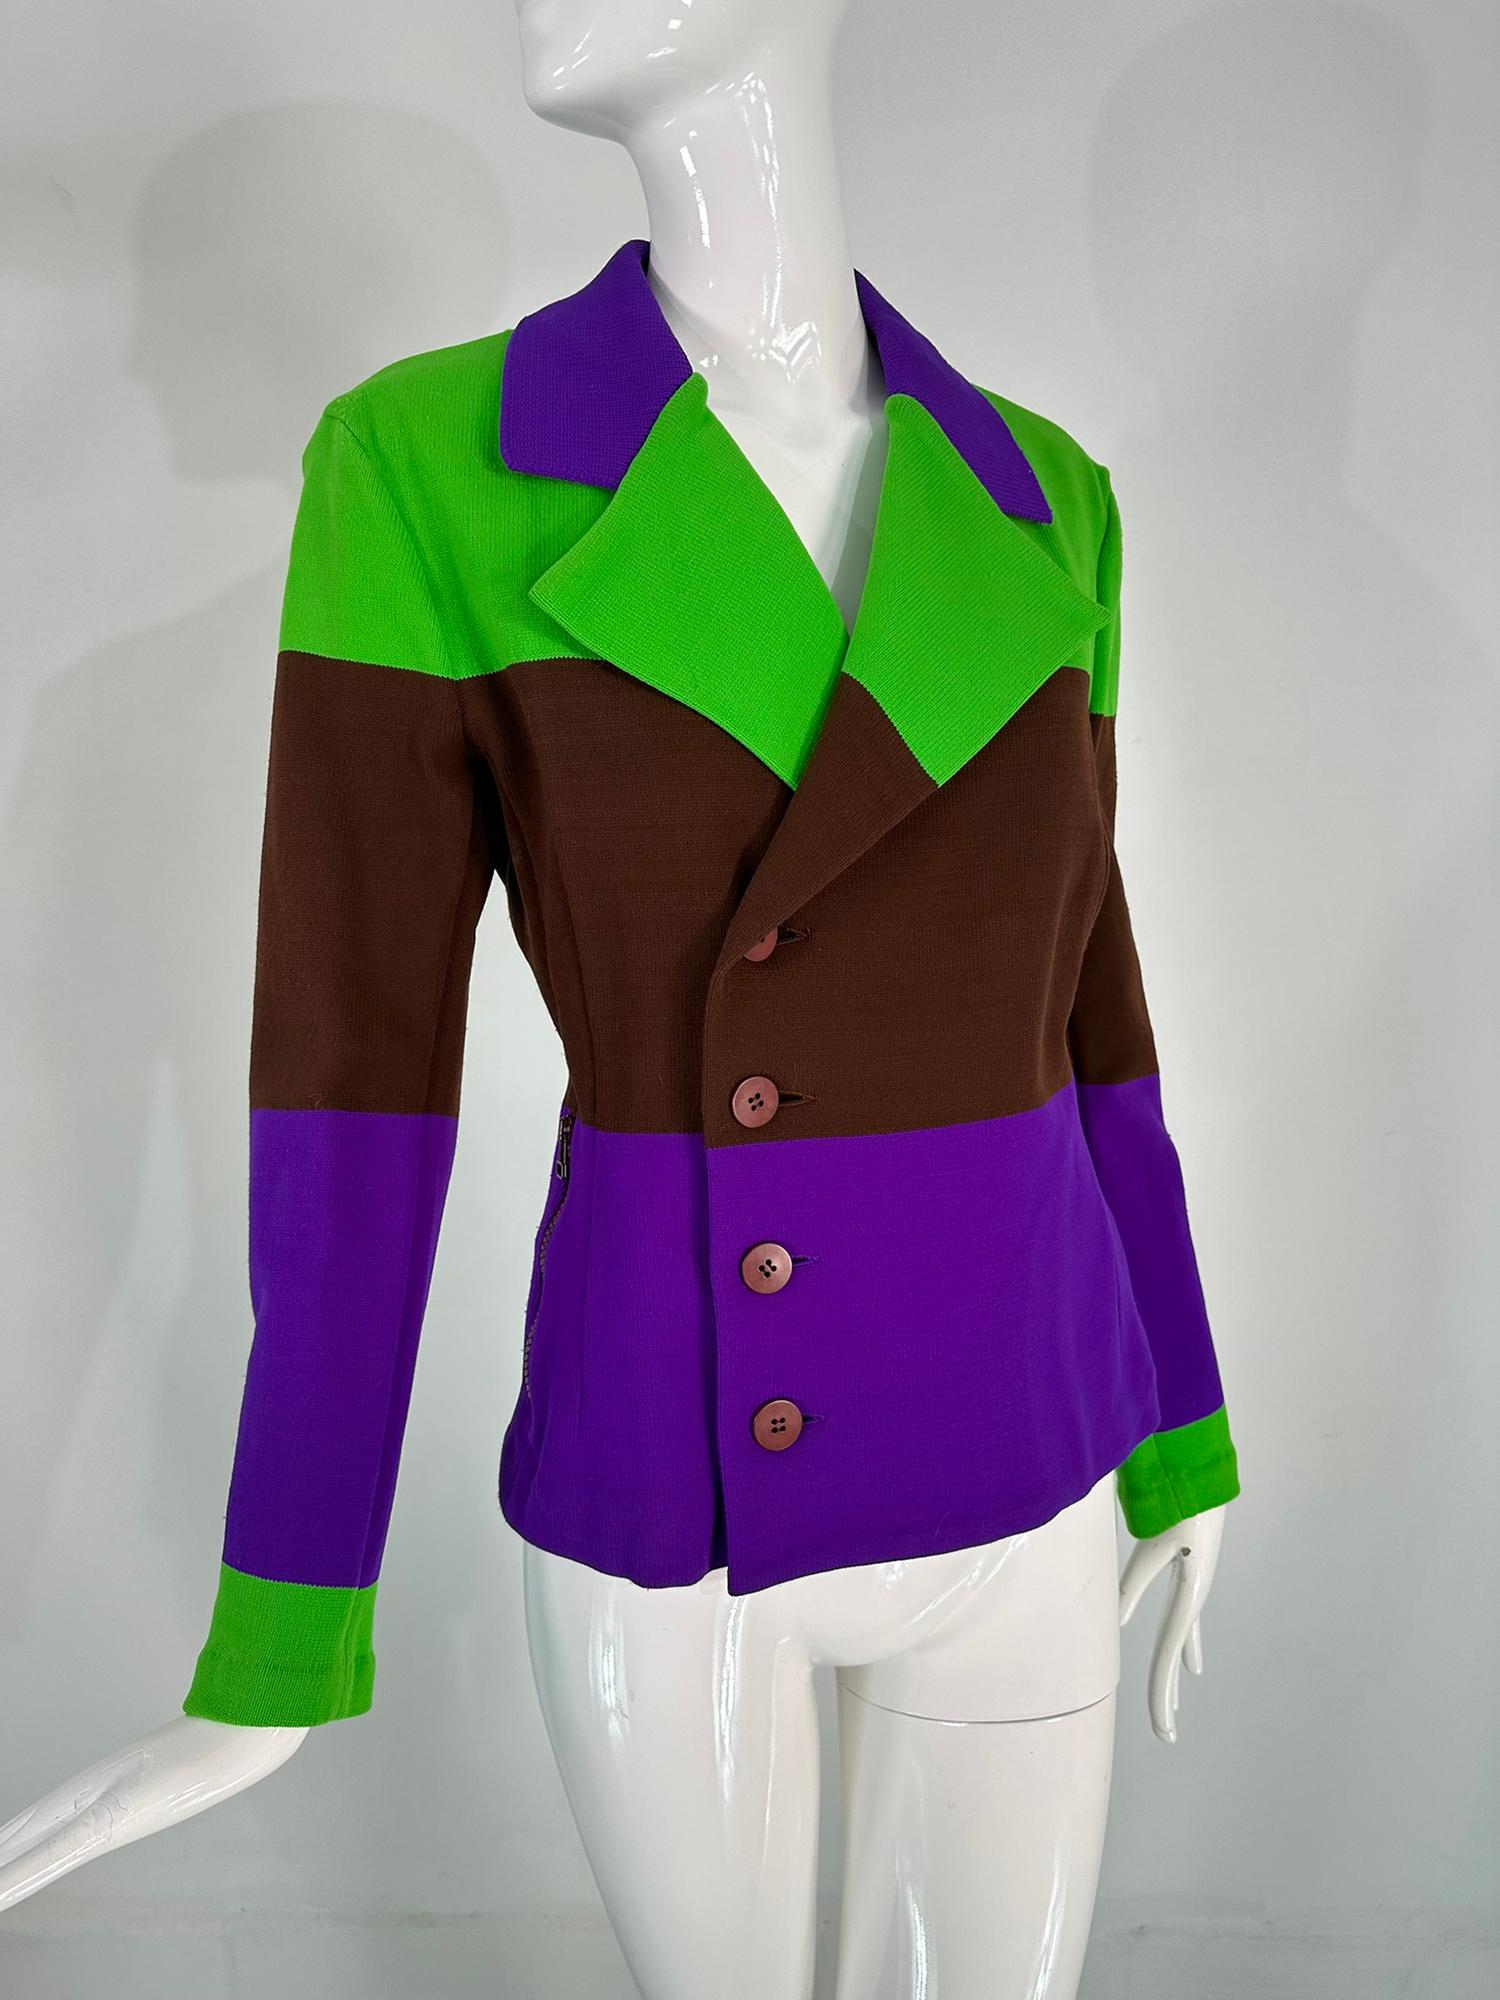 Issey Miyake colour block nylon knit jacket in acid green, brown & purple. Side button jacket with wide notched lapels. Long sleeves. Chunky zipper hip side pockets. Unlined. Marked size small.
 In excellent wearable condition.  All our clothing is